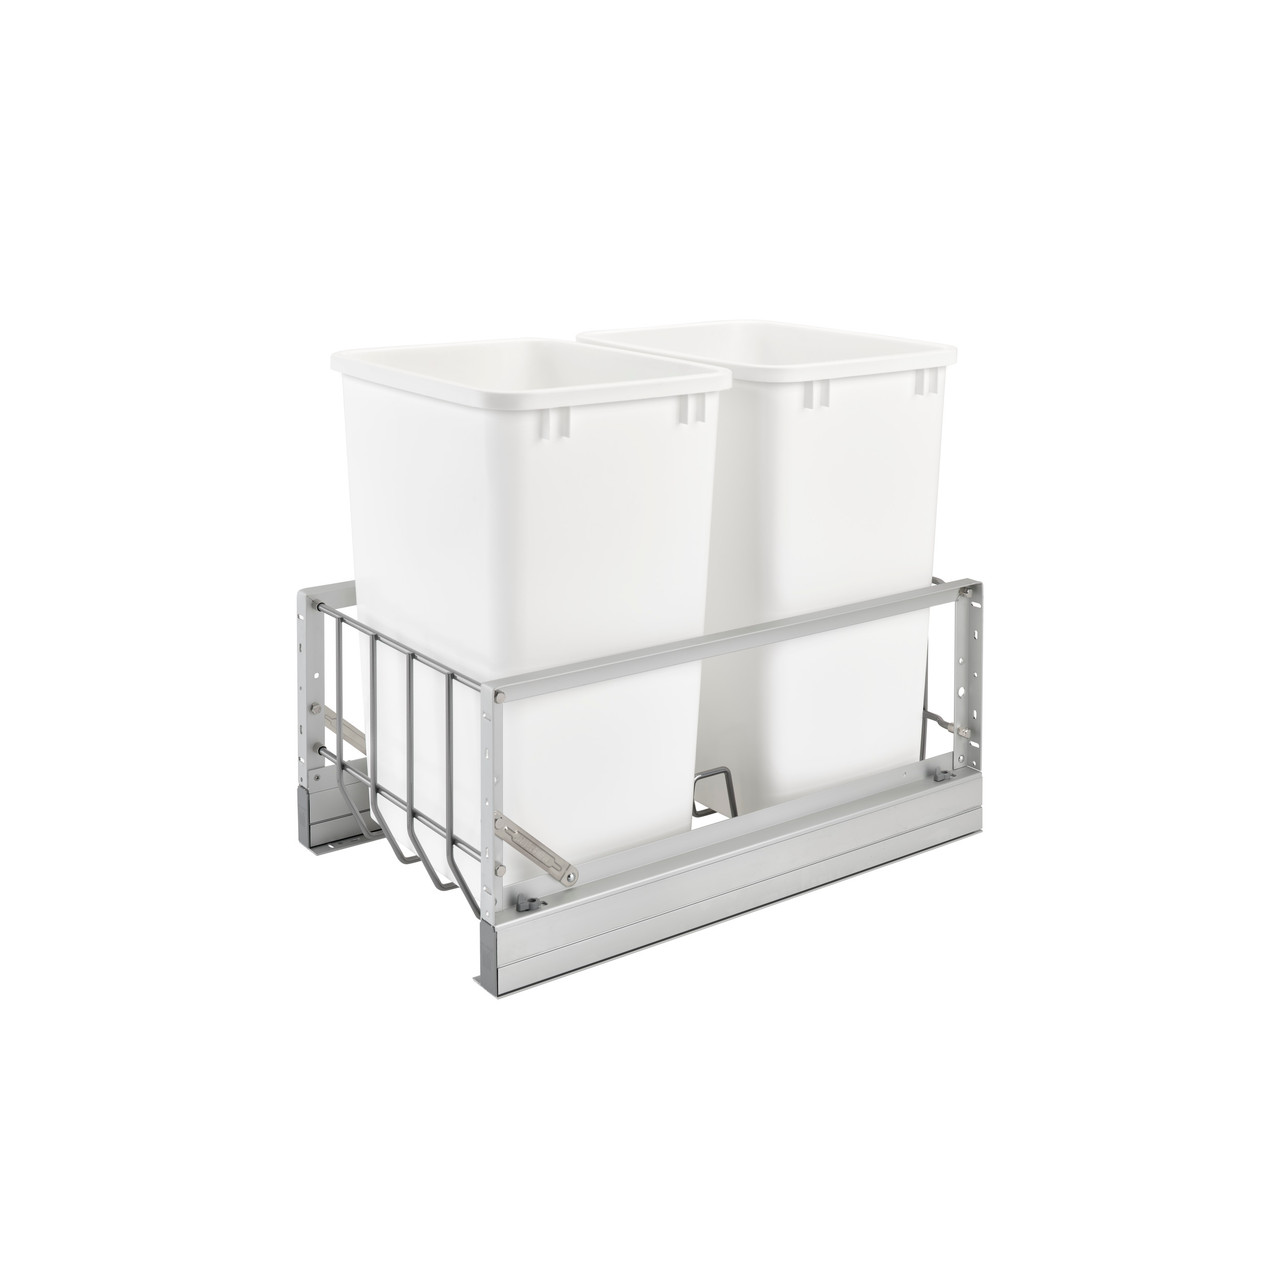 Rev-A-Shelf Double 27 Quart Pull-Out Waste Containers 5349-1527DM-2